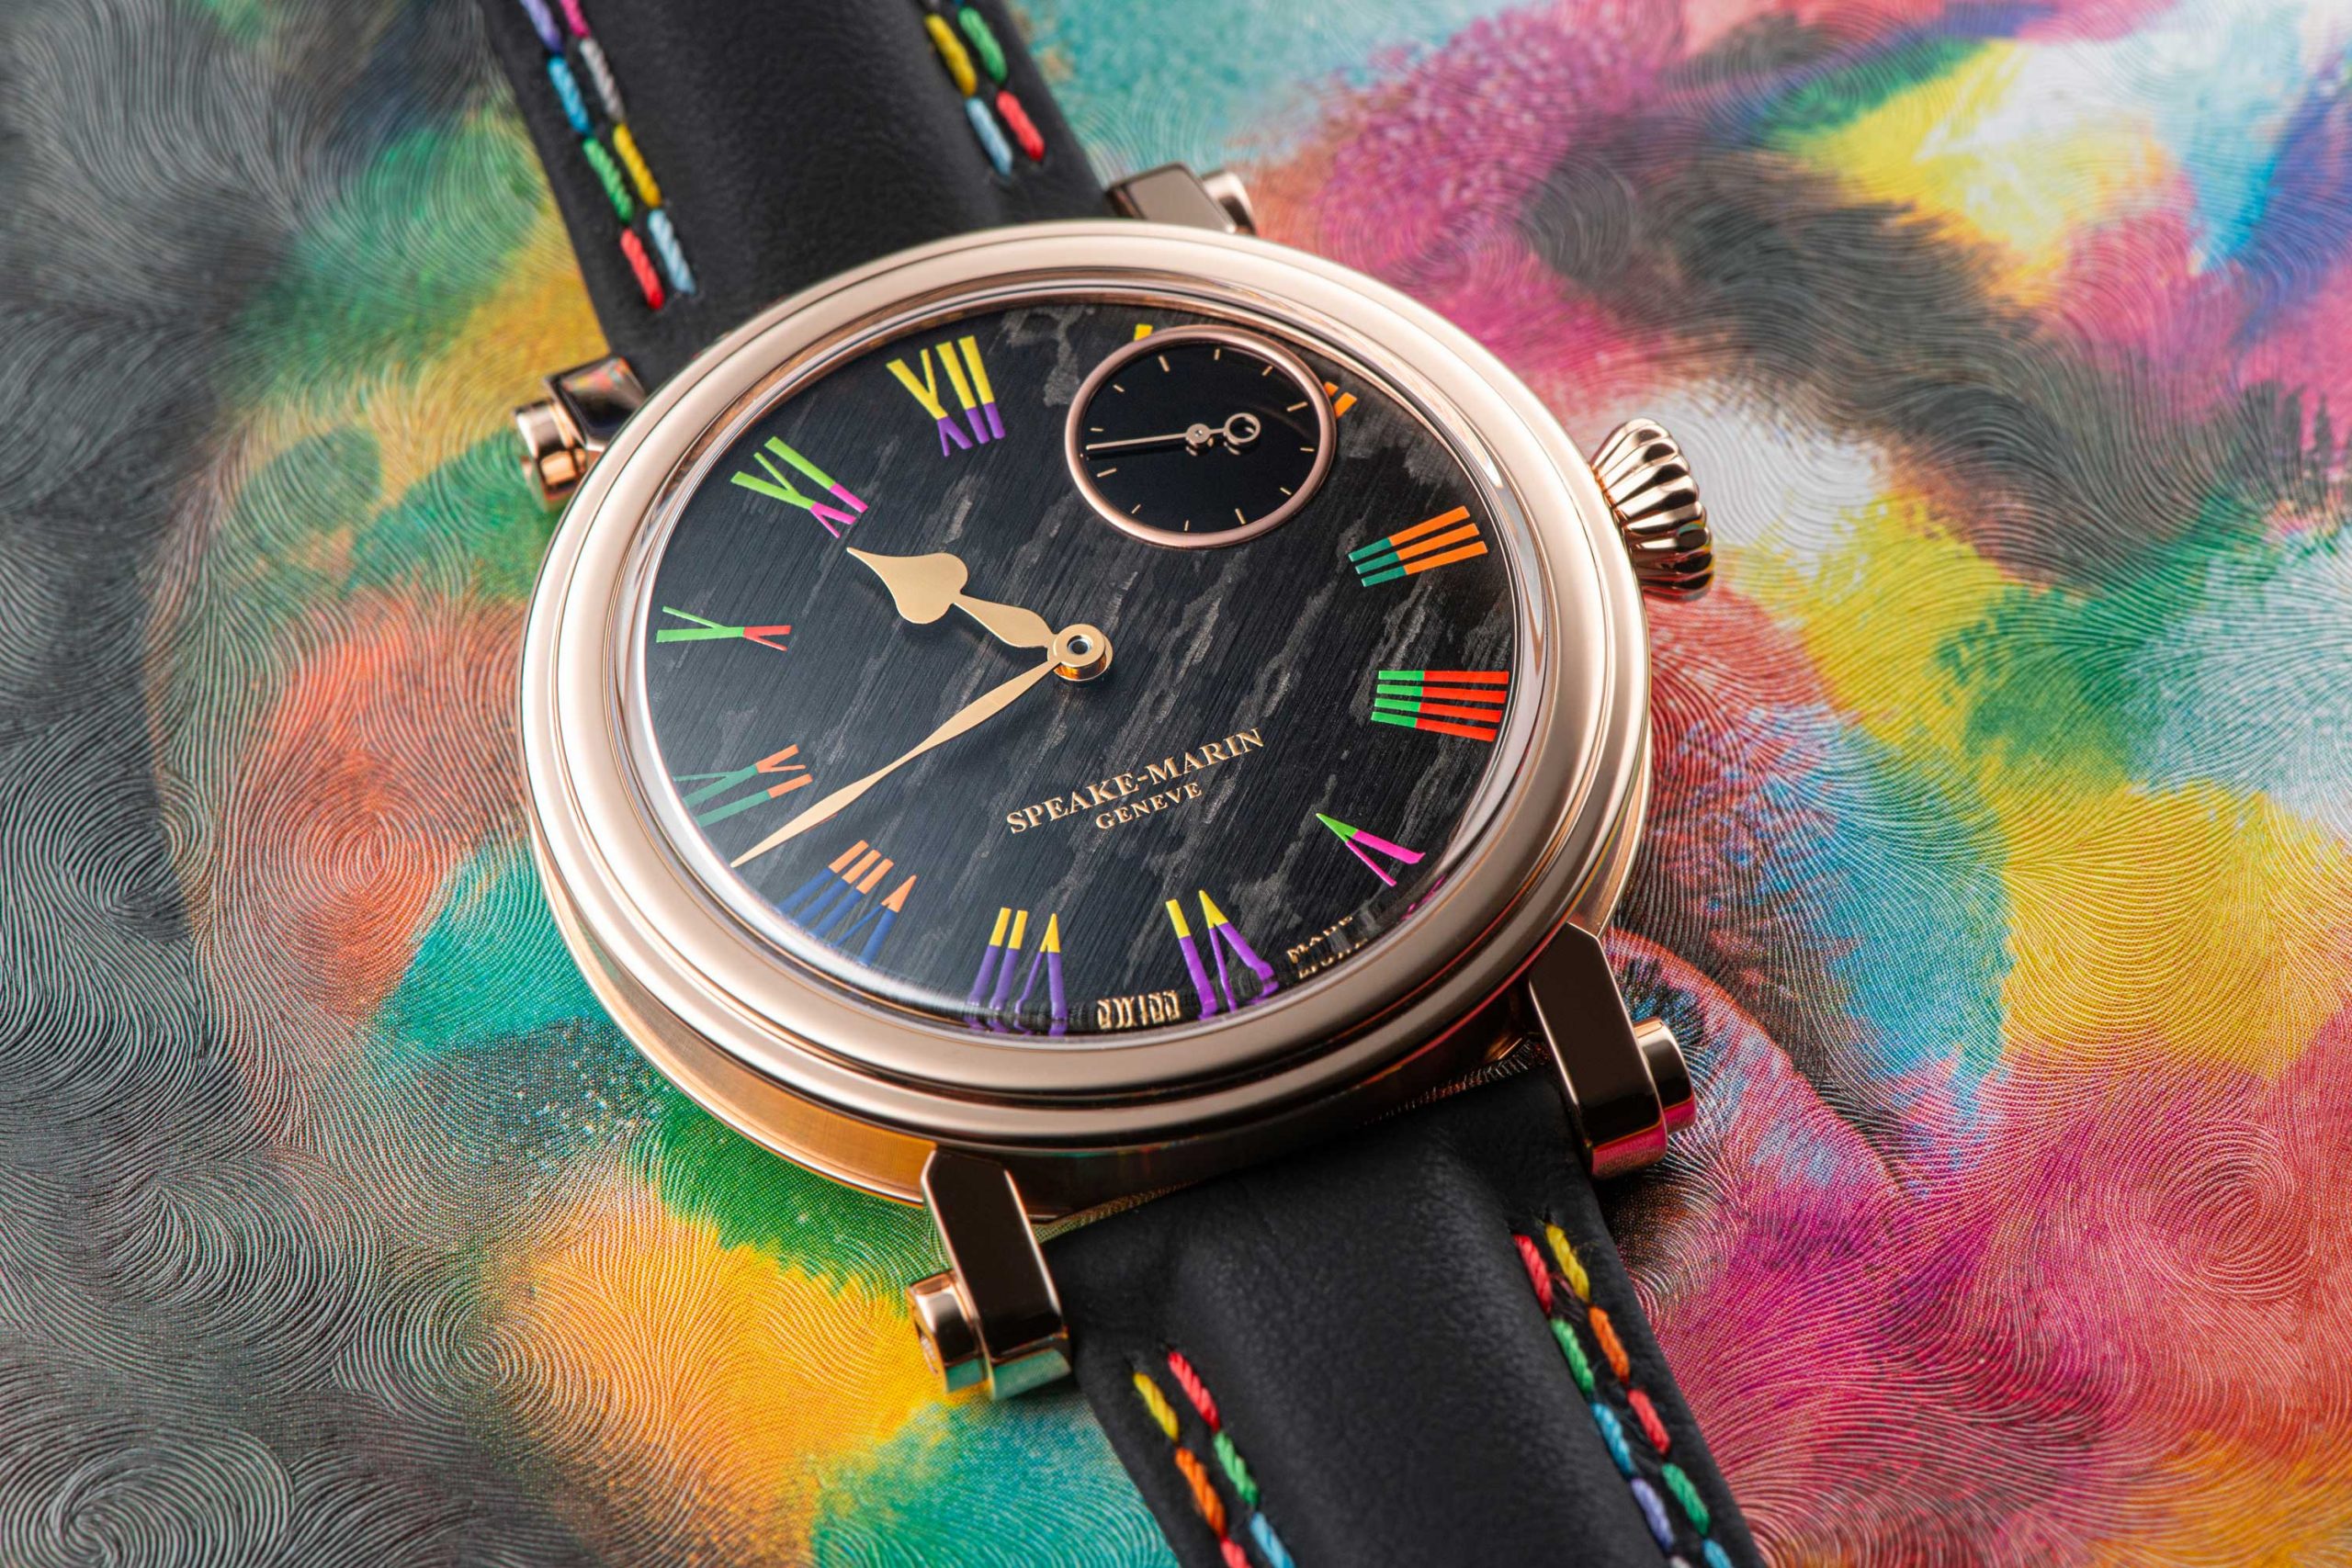 Despite its colorful proposal, the new Tutti Frutti by Speake-Marin adheres to the British firm's rigorous technical and aesthetic horological standards.